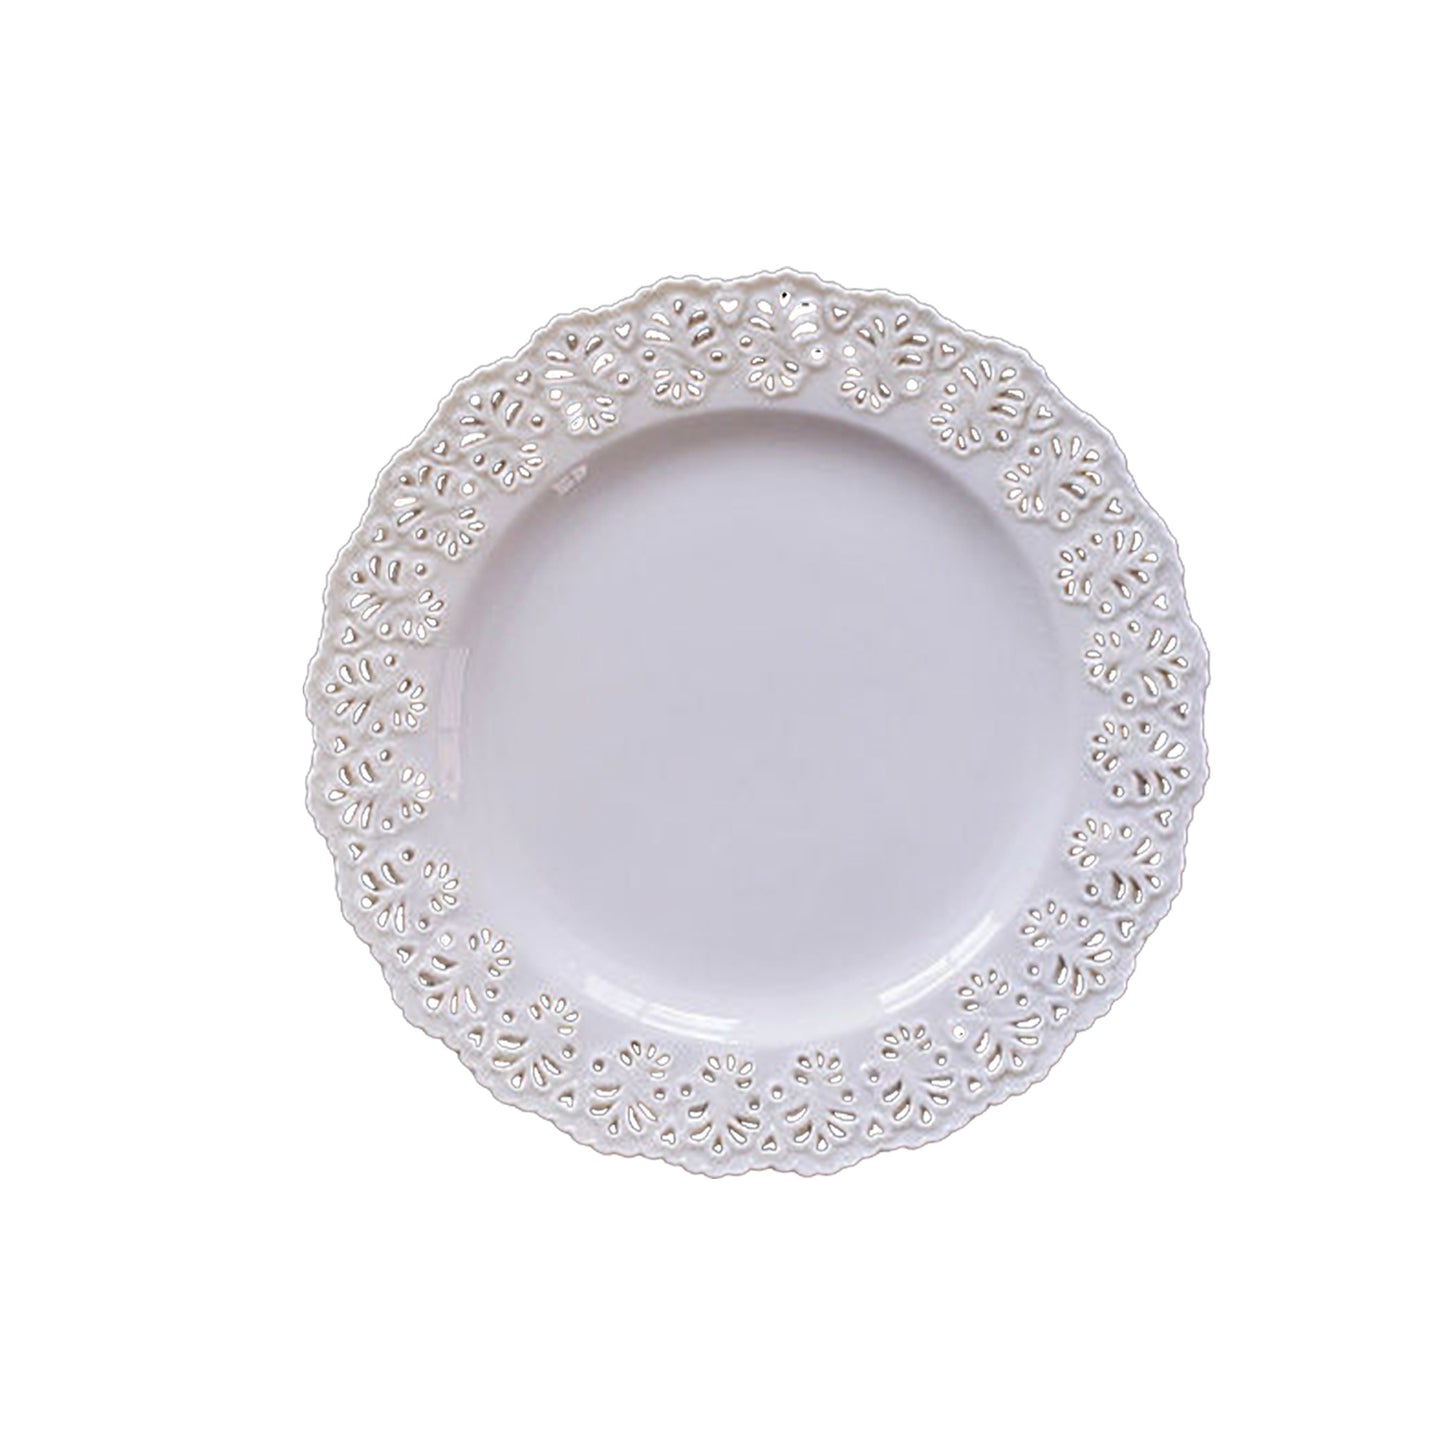 Floral Embossed Plates